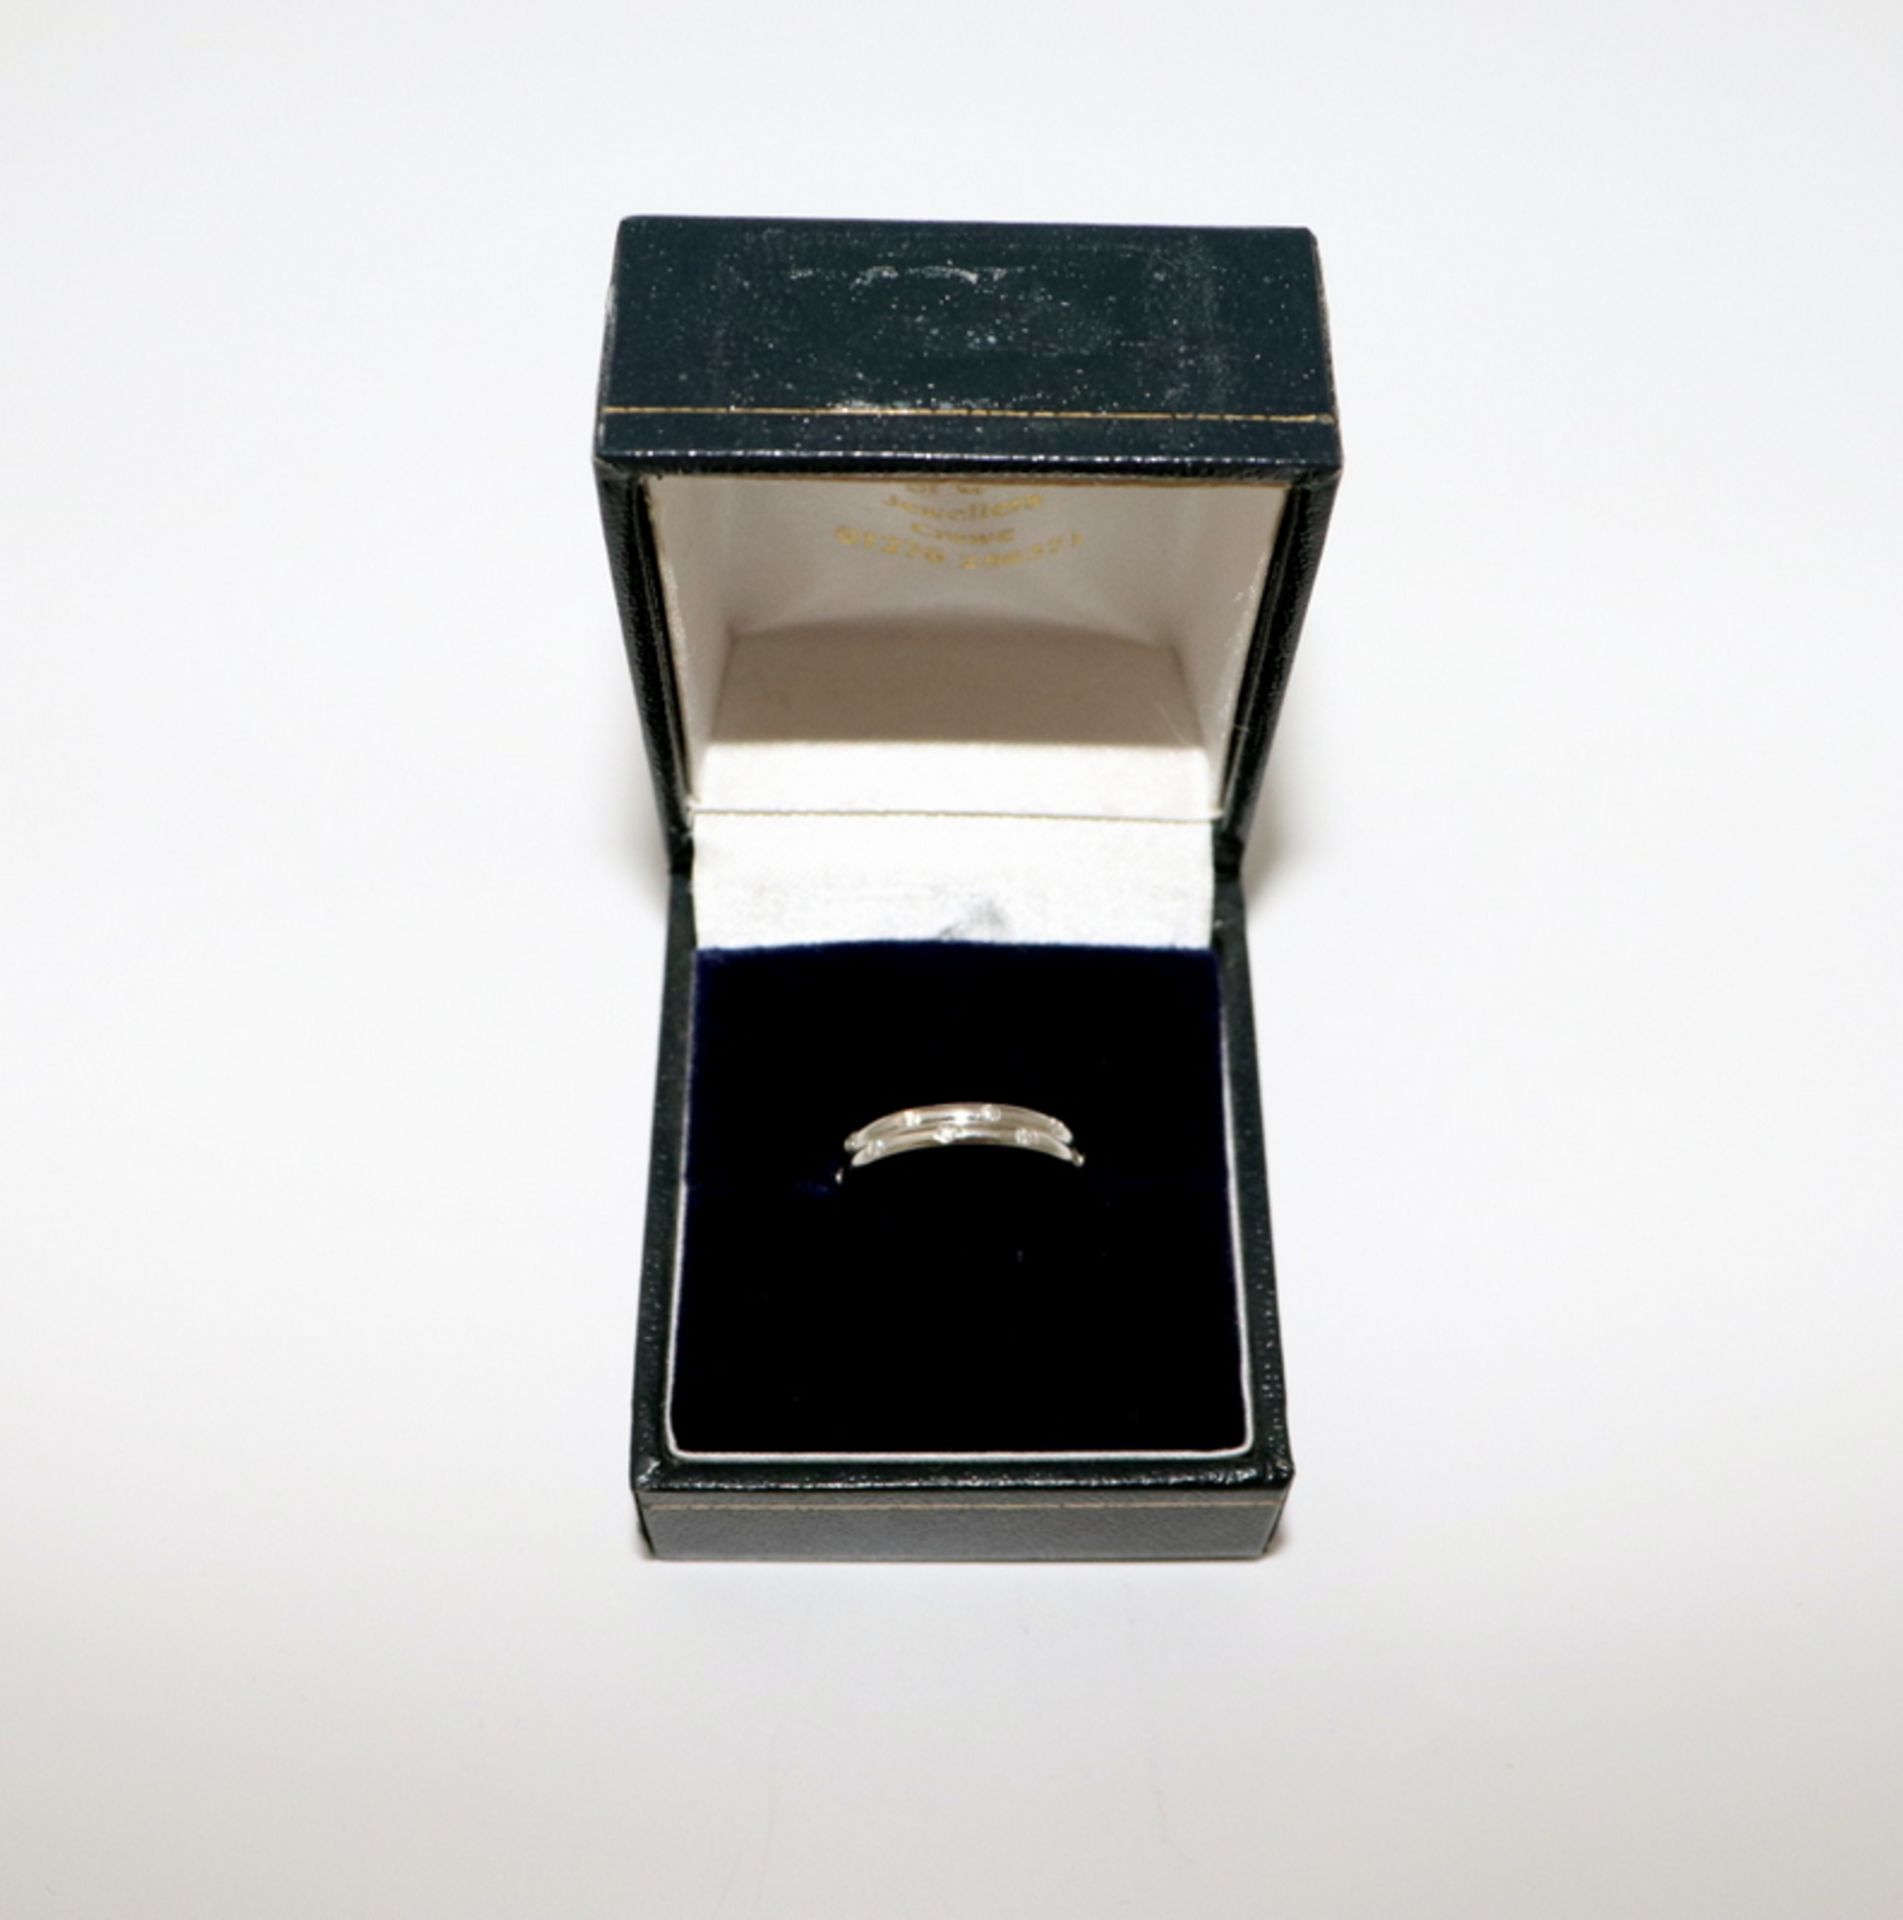 Platinum eternity ring, size l1/2 .14ct Diamond (rrp £450) (Located Stockport – See General Notes